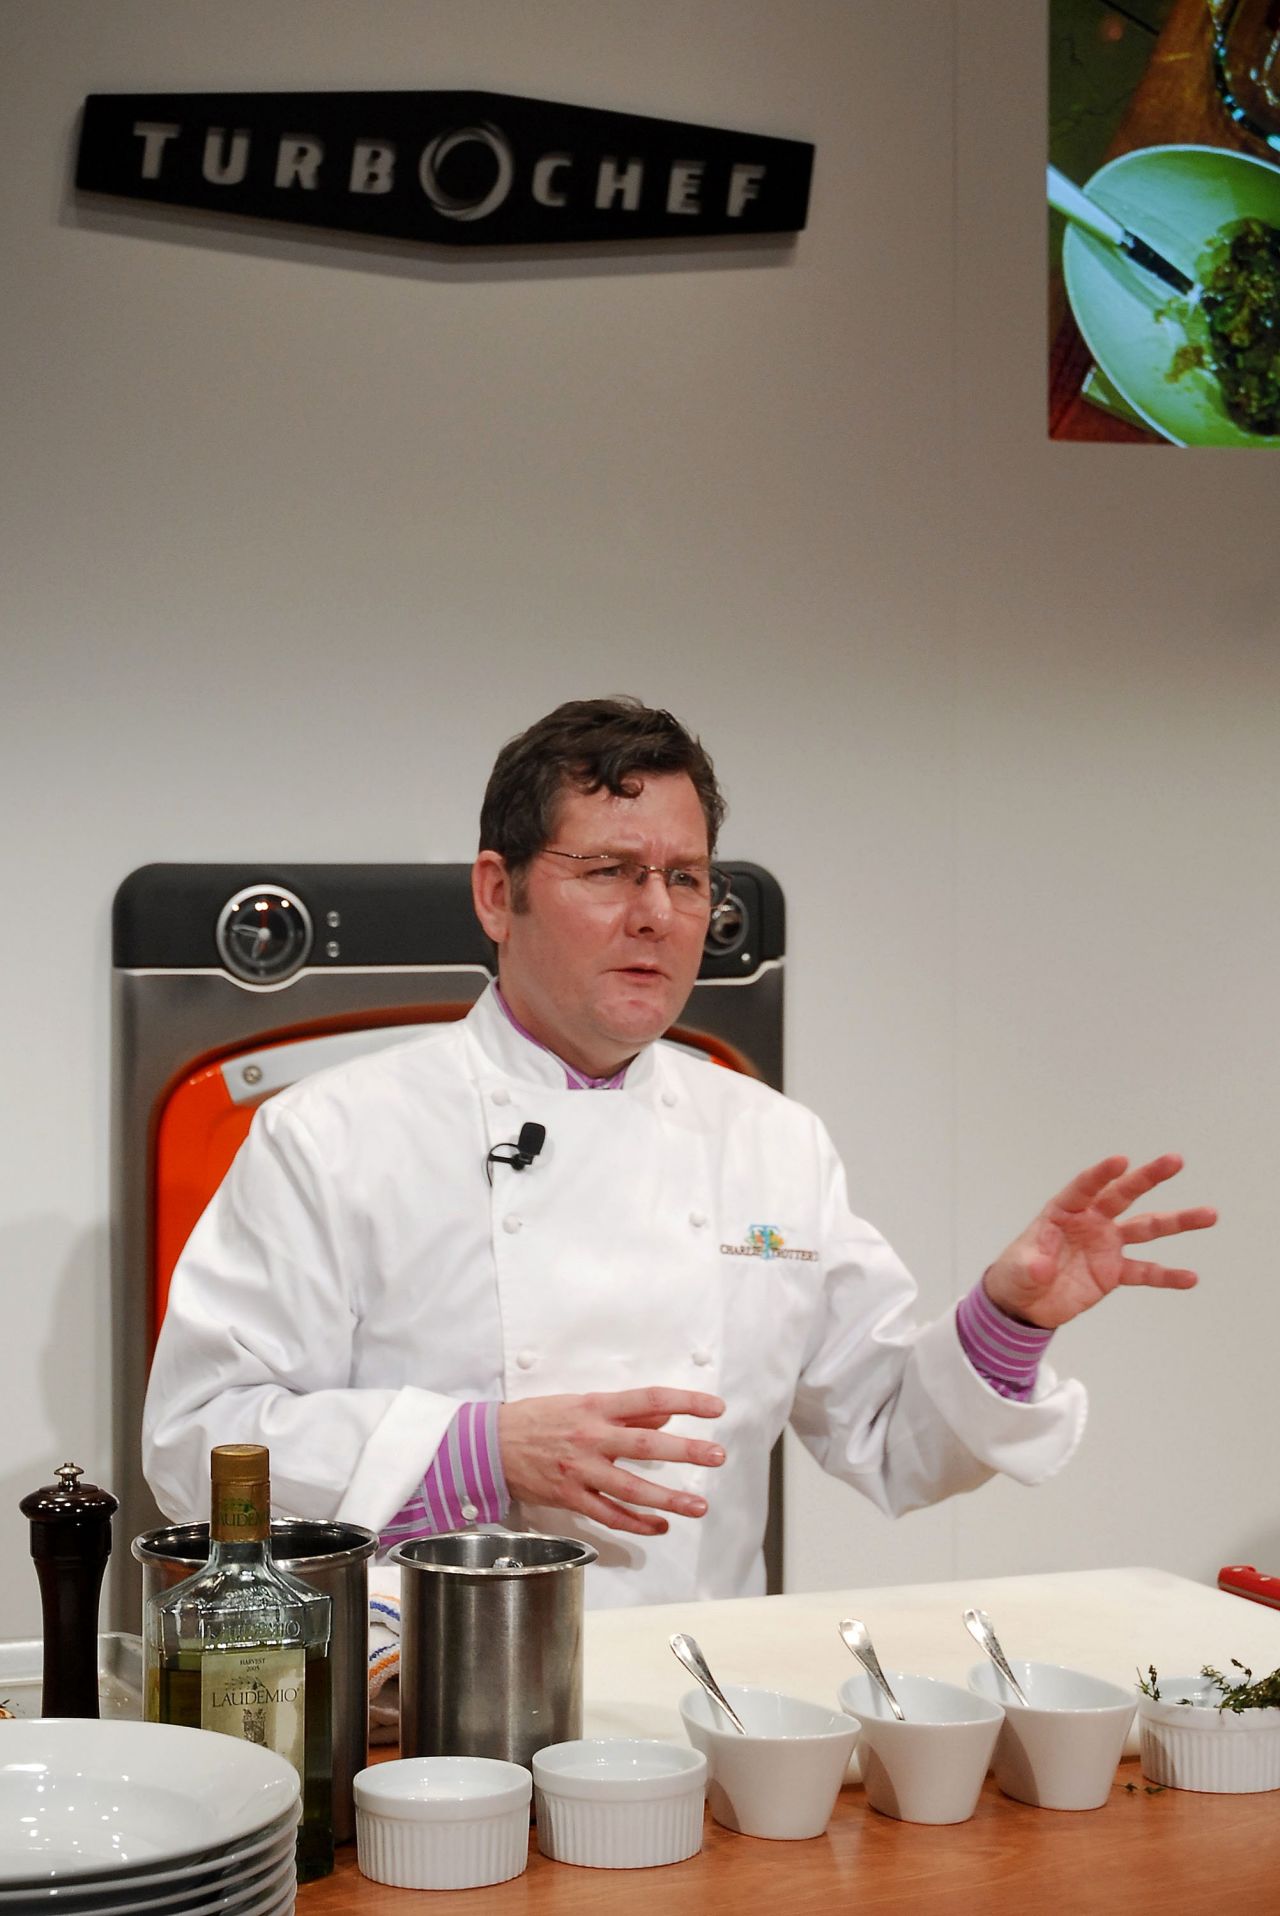 In November, the food world said a sad, sudden farewell to one of its most vital and influential forces, Charlie Trotter, who passed away from a stroke at the age of 54. The chef's namesake restaurant in Chicago's Lincoln Park received a long list of culinary honors over its 25 years of service, and trained many of the most prominent people working in the food world today. Trotter was also well known for his philanthropy and was chosen as "Humanitarian of the Year" by the James Beard Foundation in 2012.